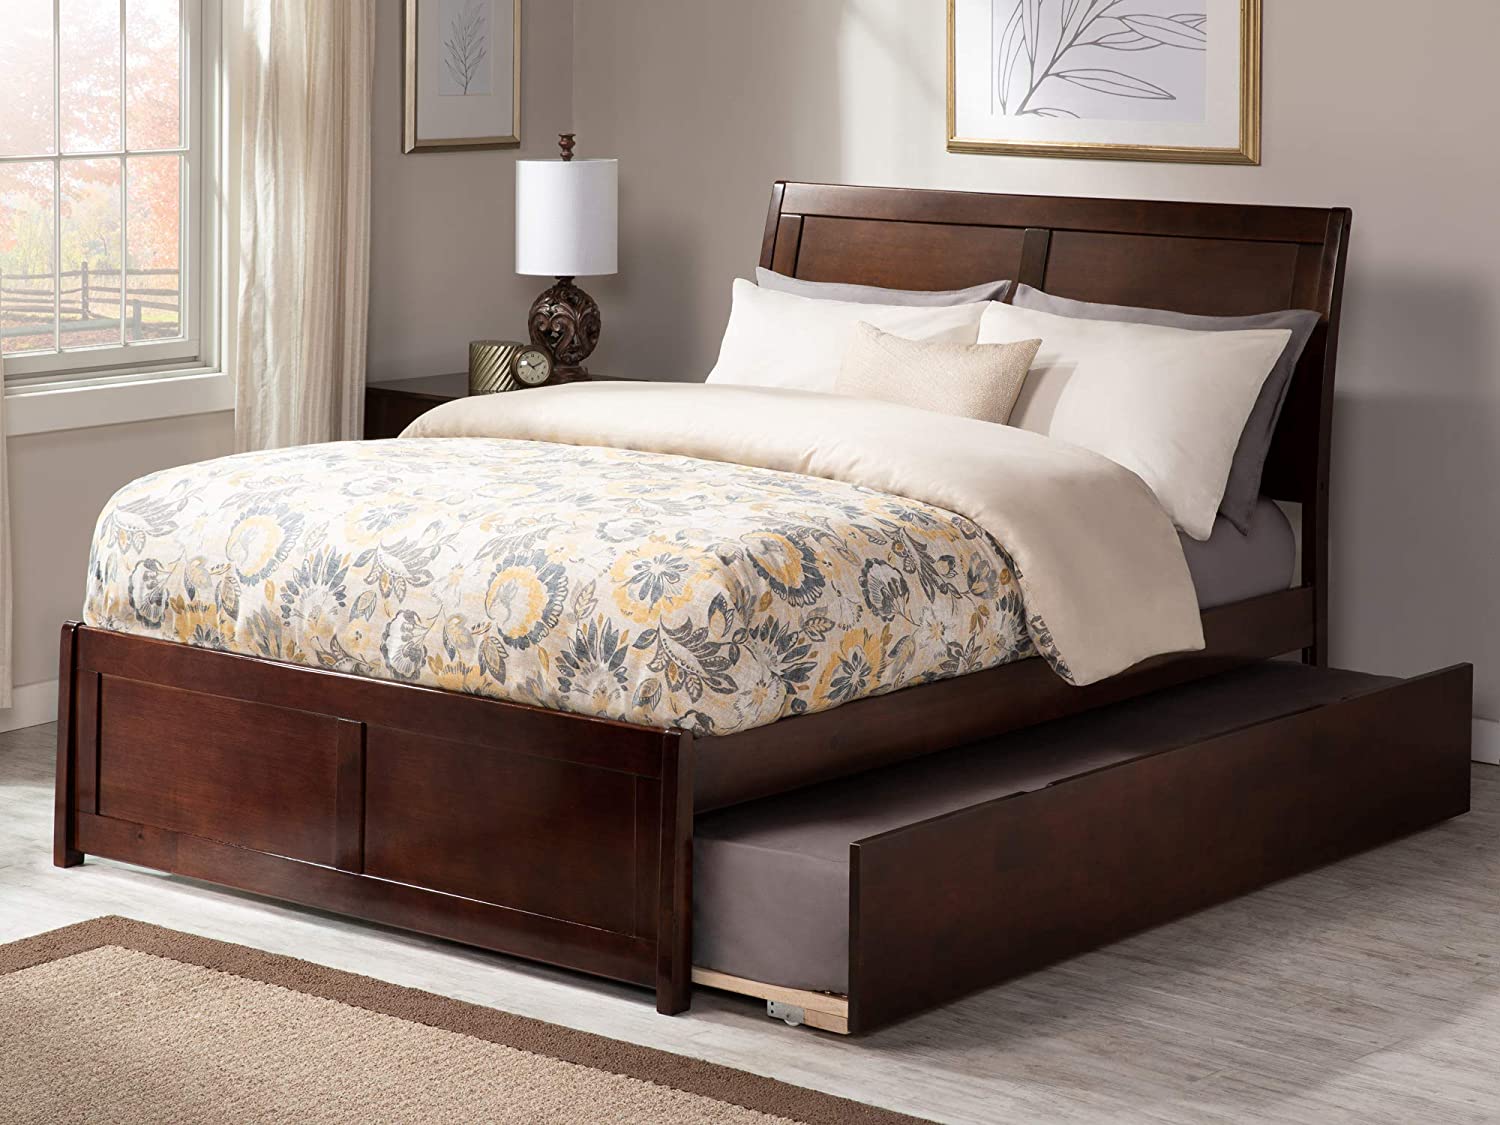 AFI Portland Platform Bed with Matching Footboard and Turbo Charger with Twin Size Urban Trundle, Full, Walnut